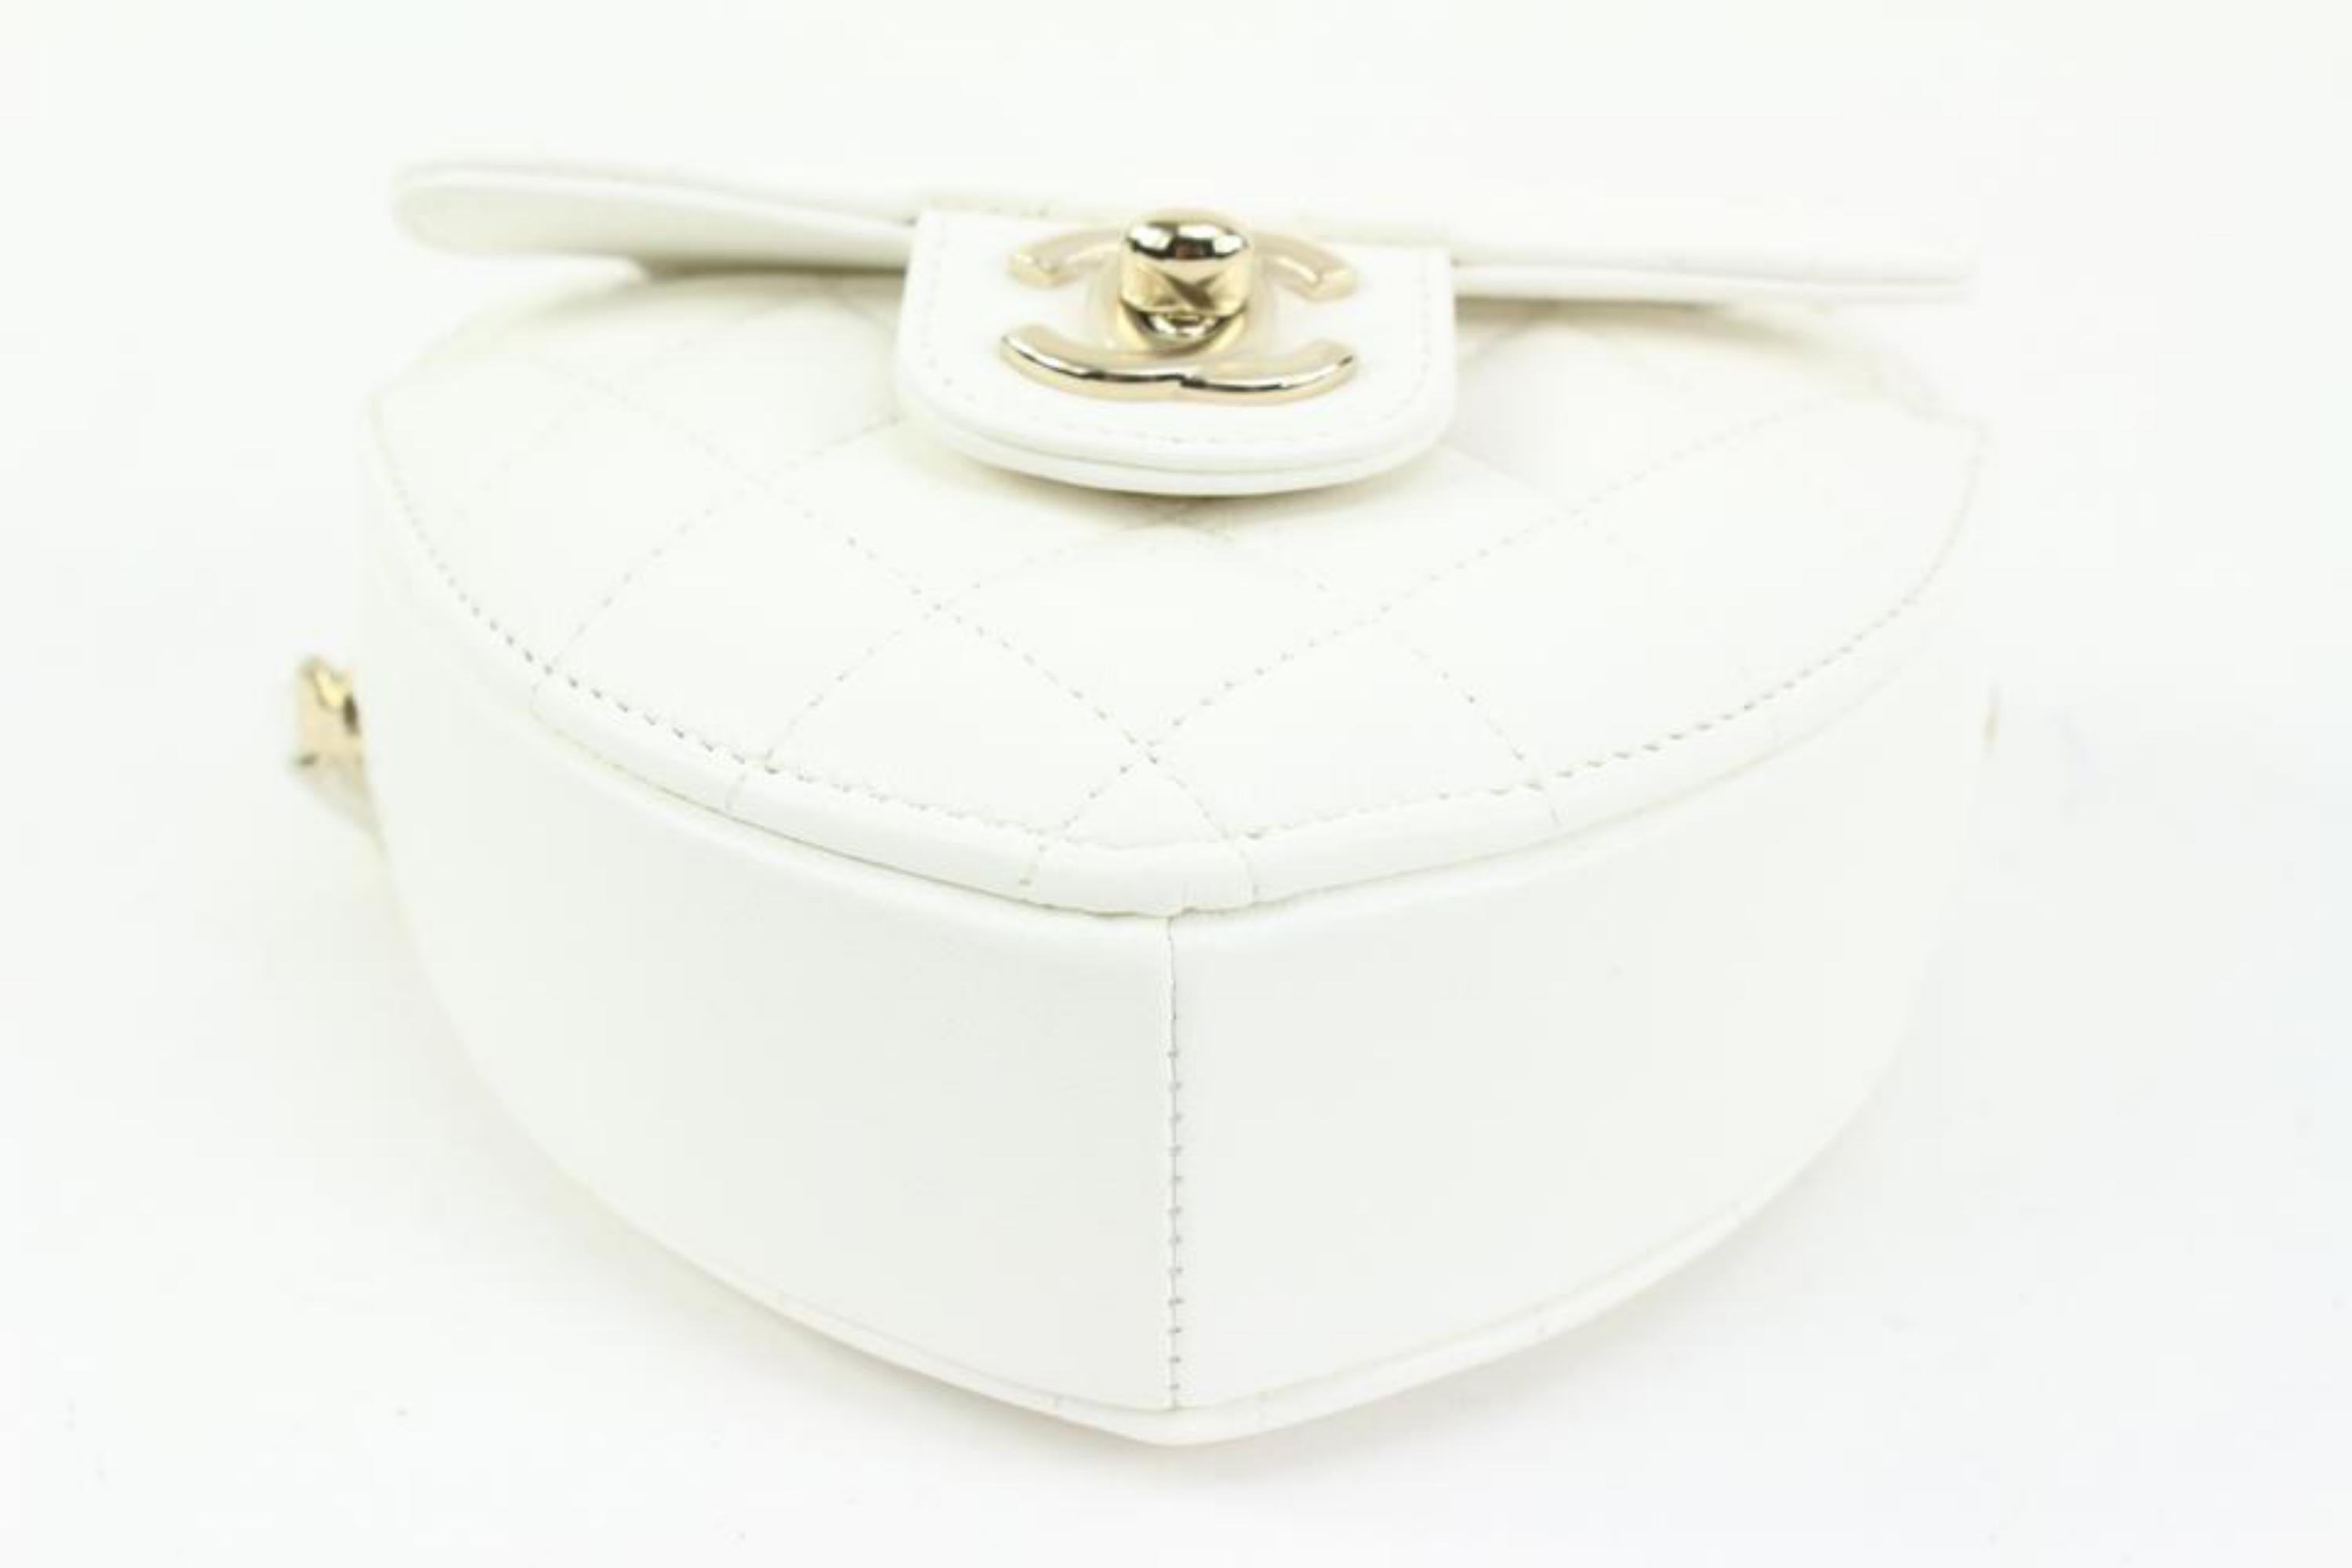 Chanel White Quilted Lambskin CC in Love Heart Bag Clutch on Chain 26cz420s 5